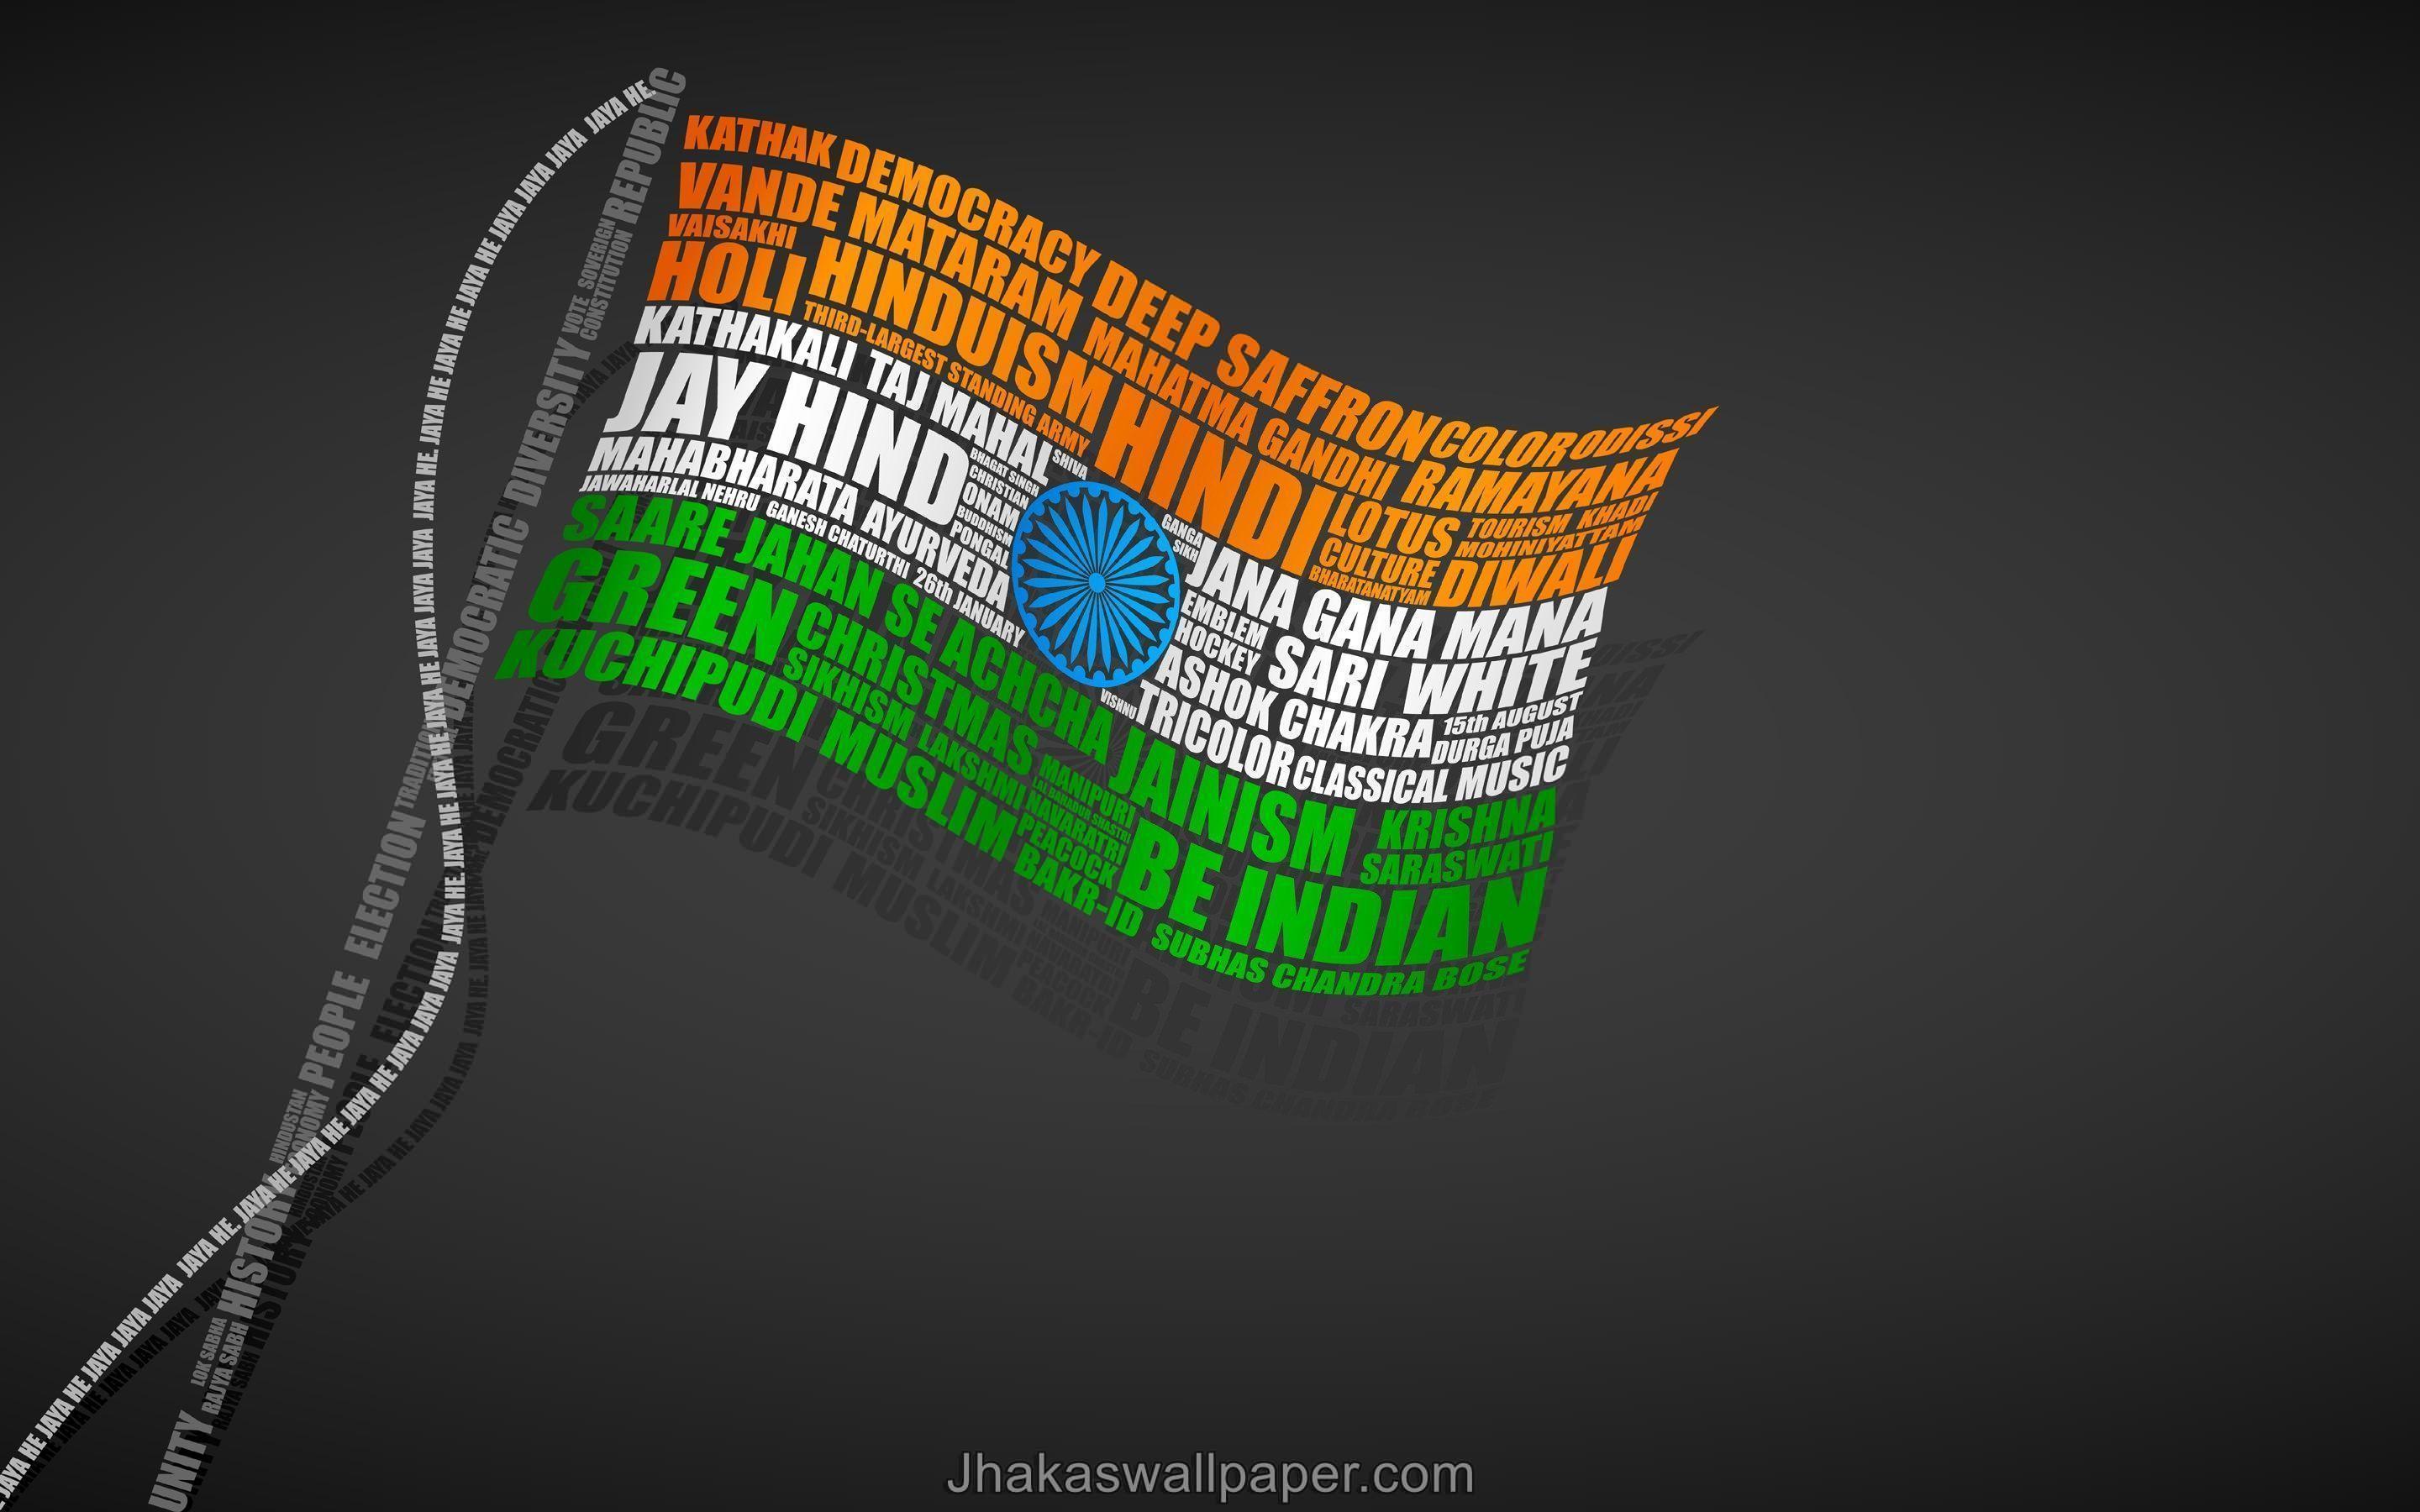 August Slogans for Independence Day 2014. Happy Birthday 2015